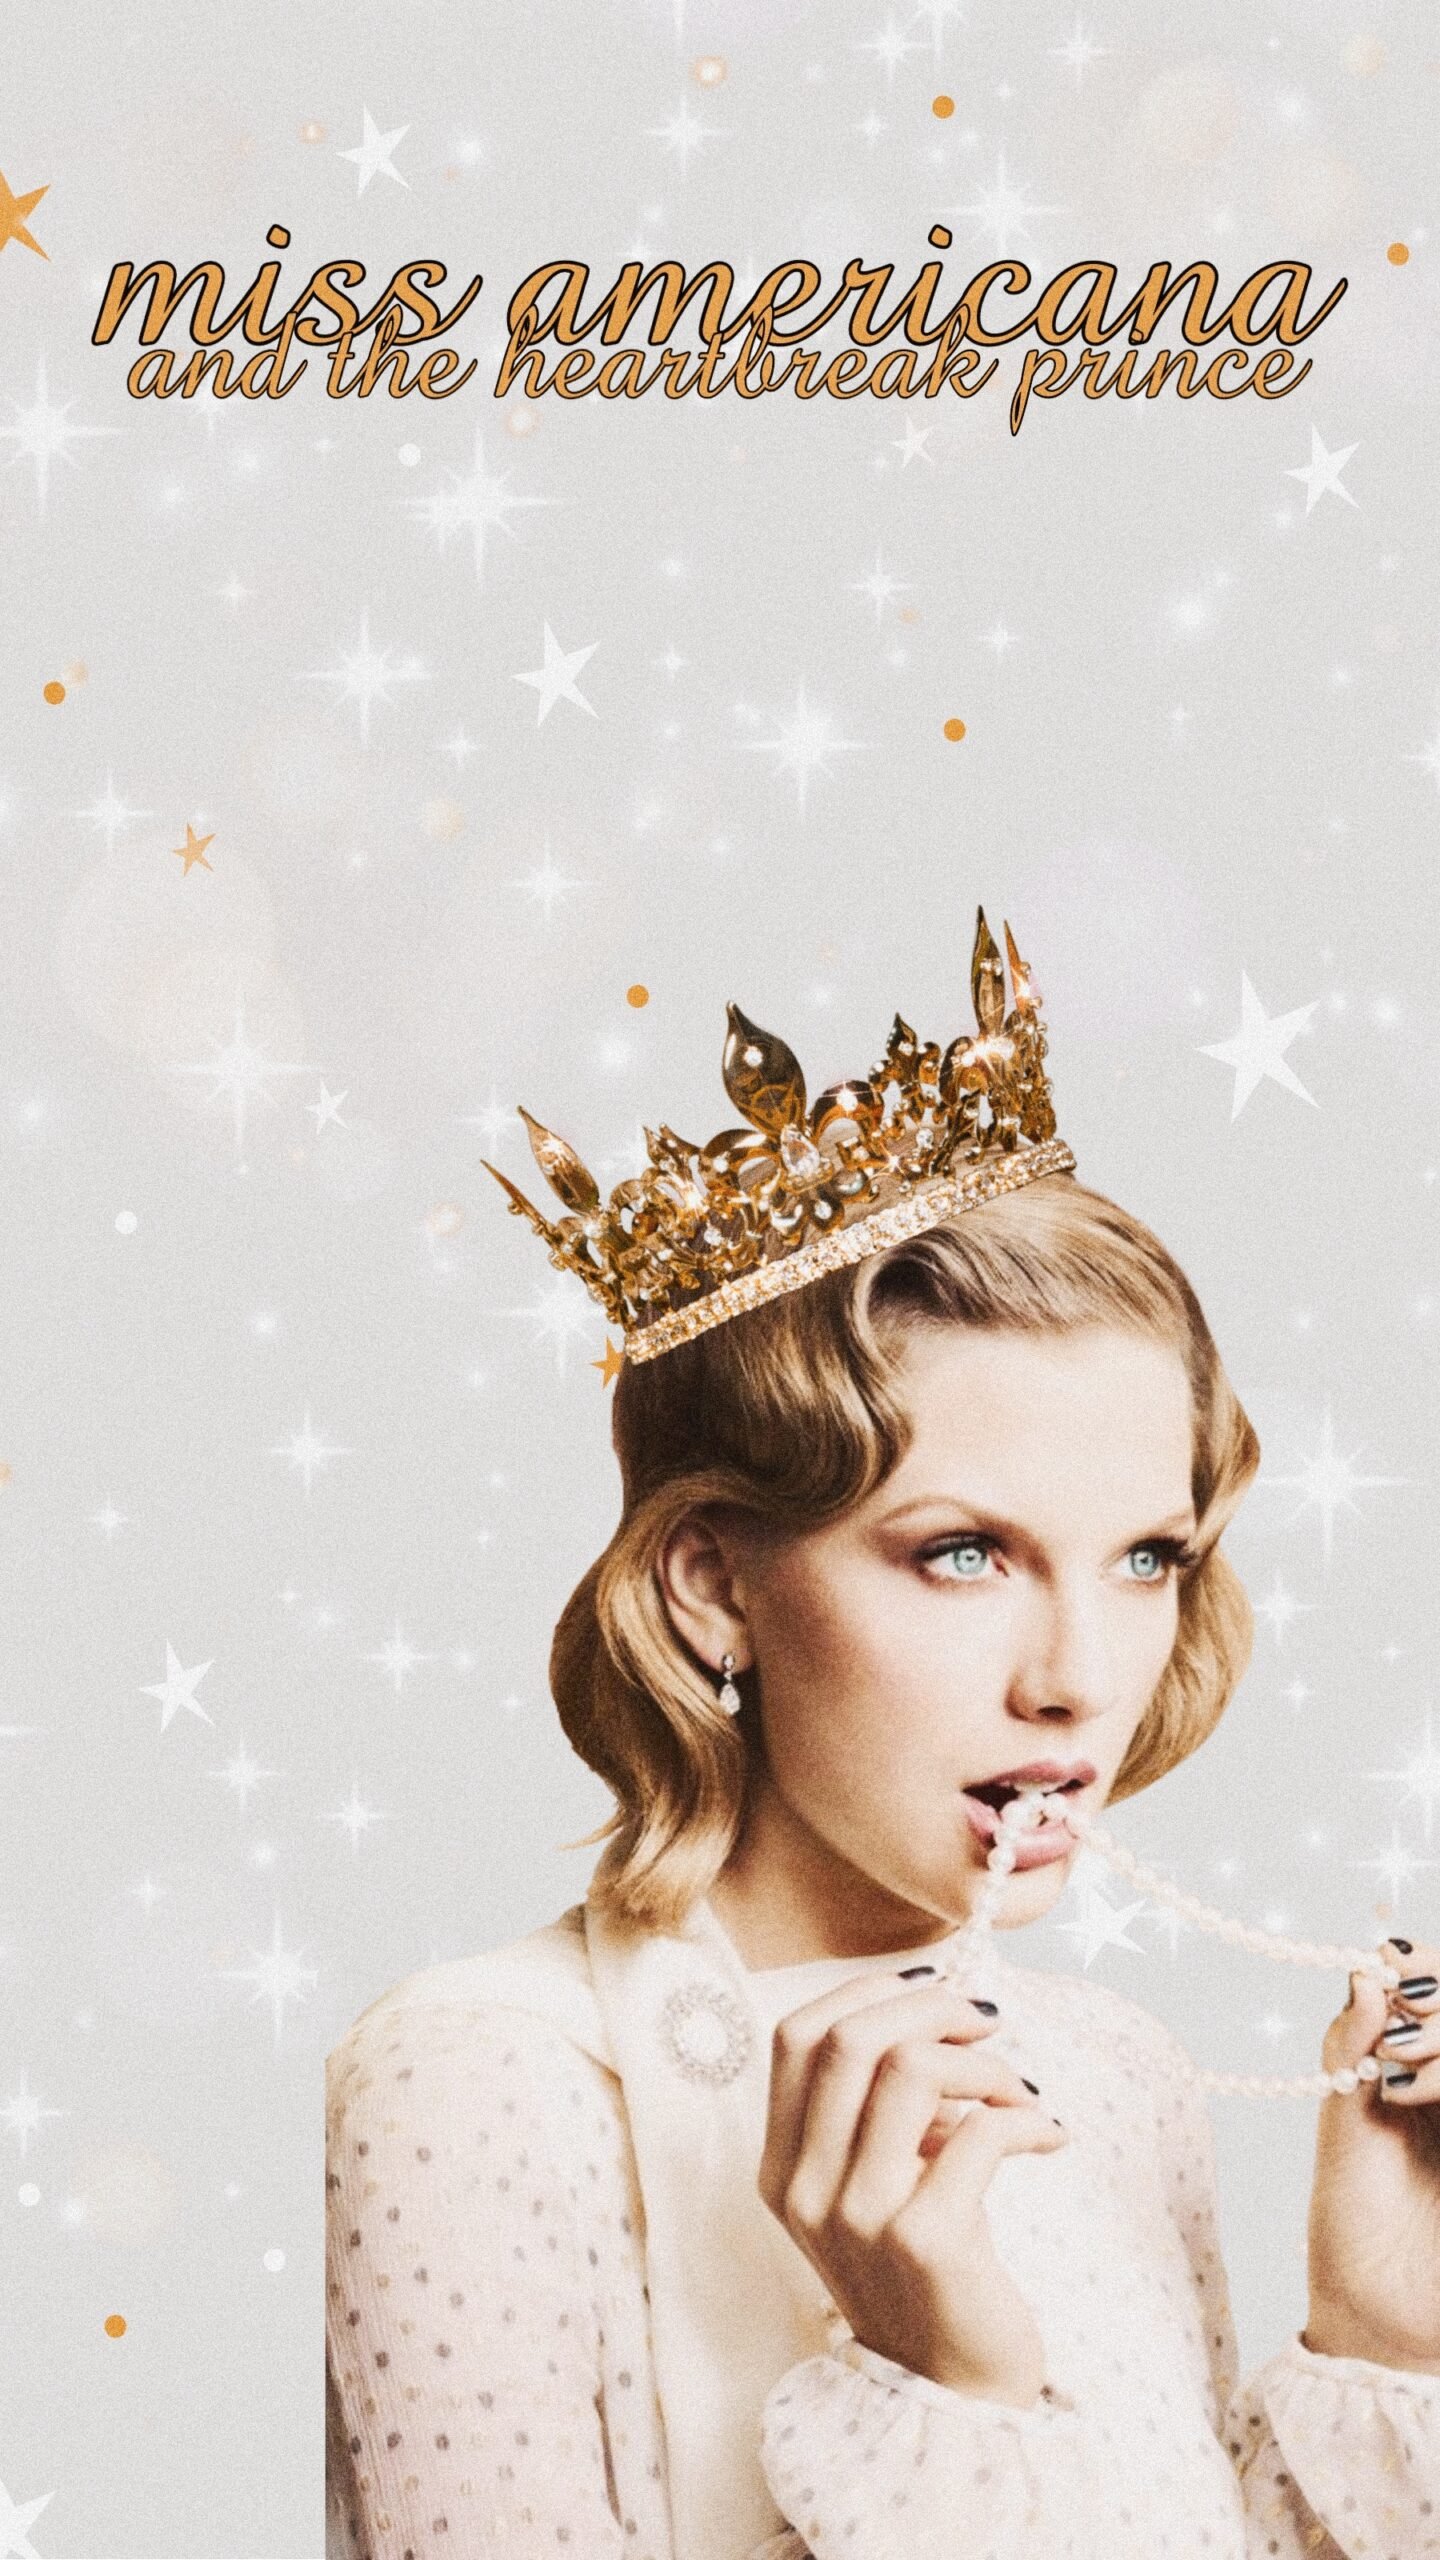 Taylor Swift Wallpapers For iPads